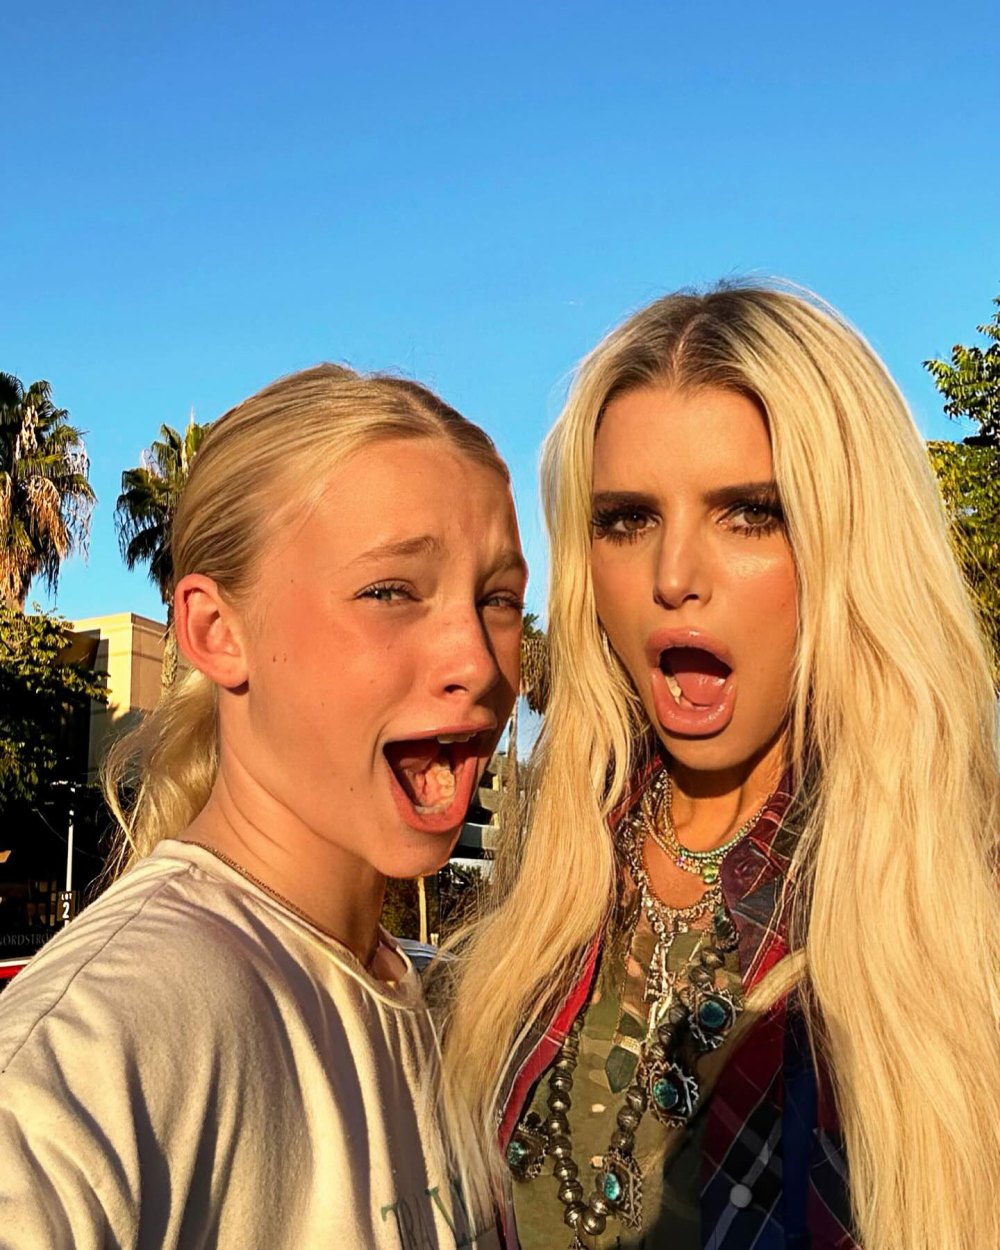 Jessica Simpson is Hilariously Mistaken as Britney Spears by Fan Wanting Autograph